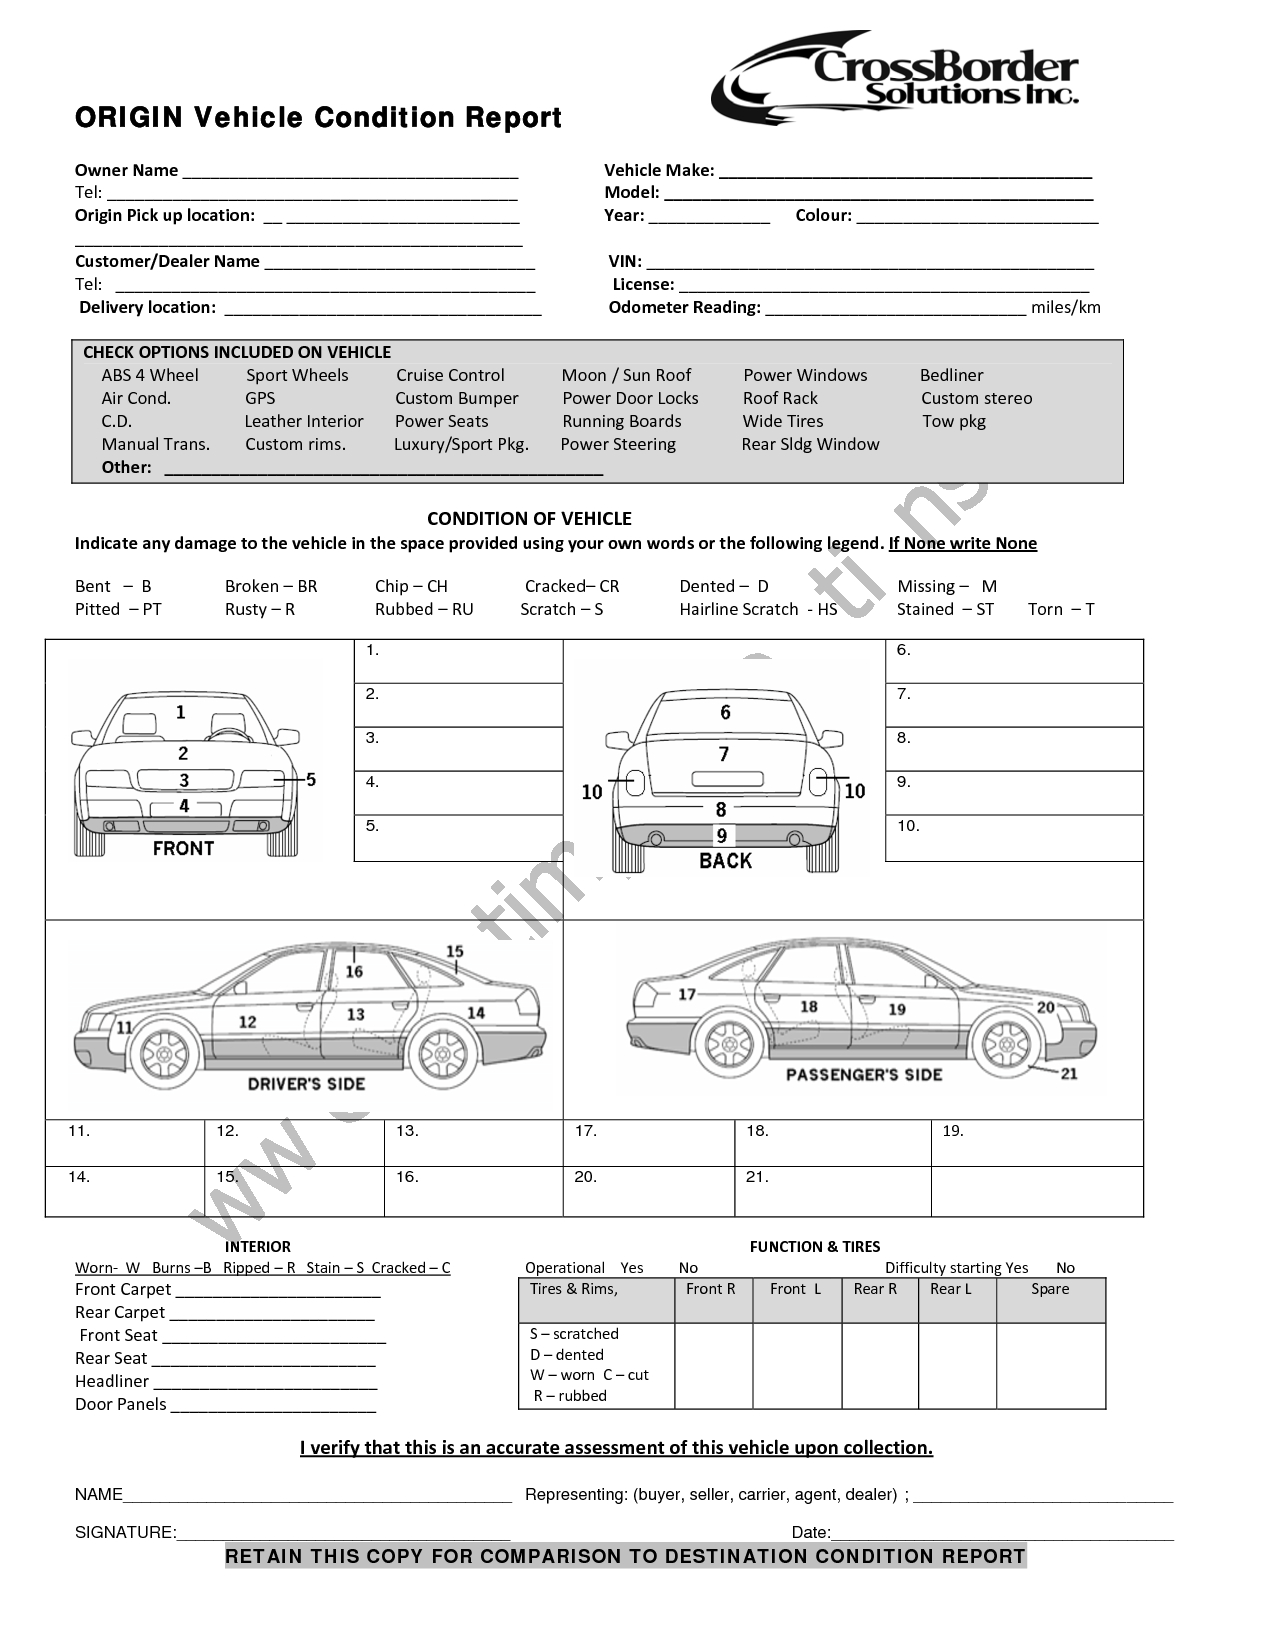 Vehicle Condition Report Templates  Word Excel Samples regarding Truck Condition Report Template